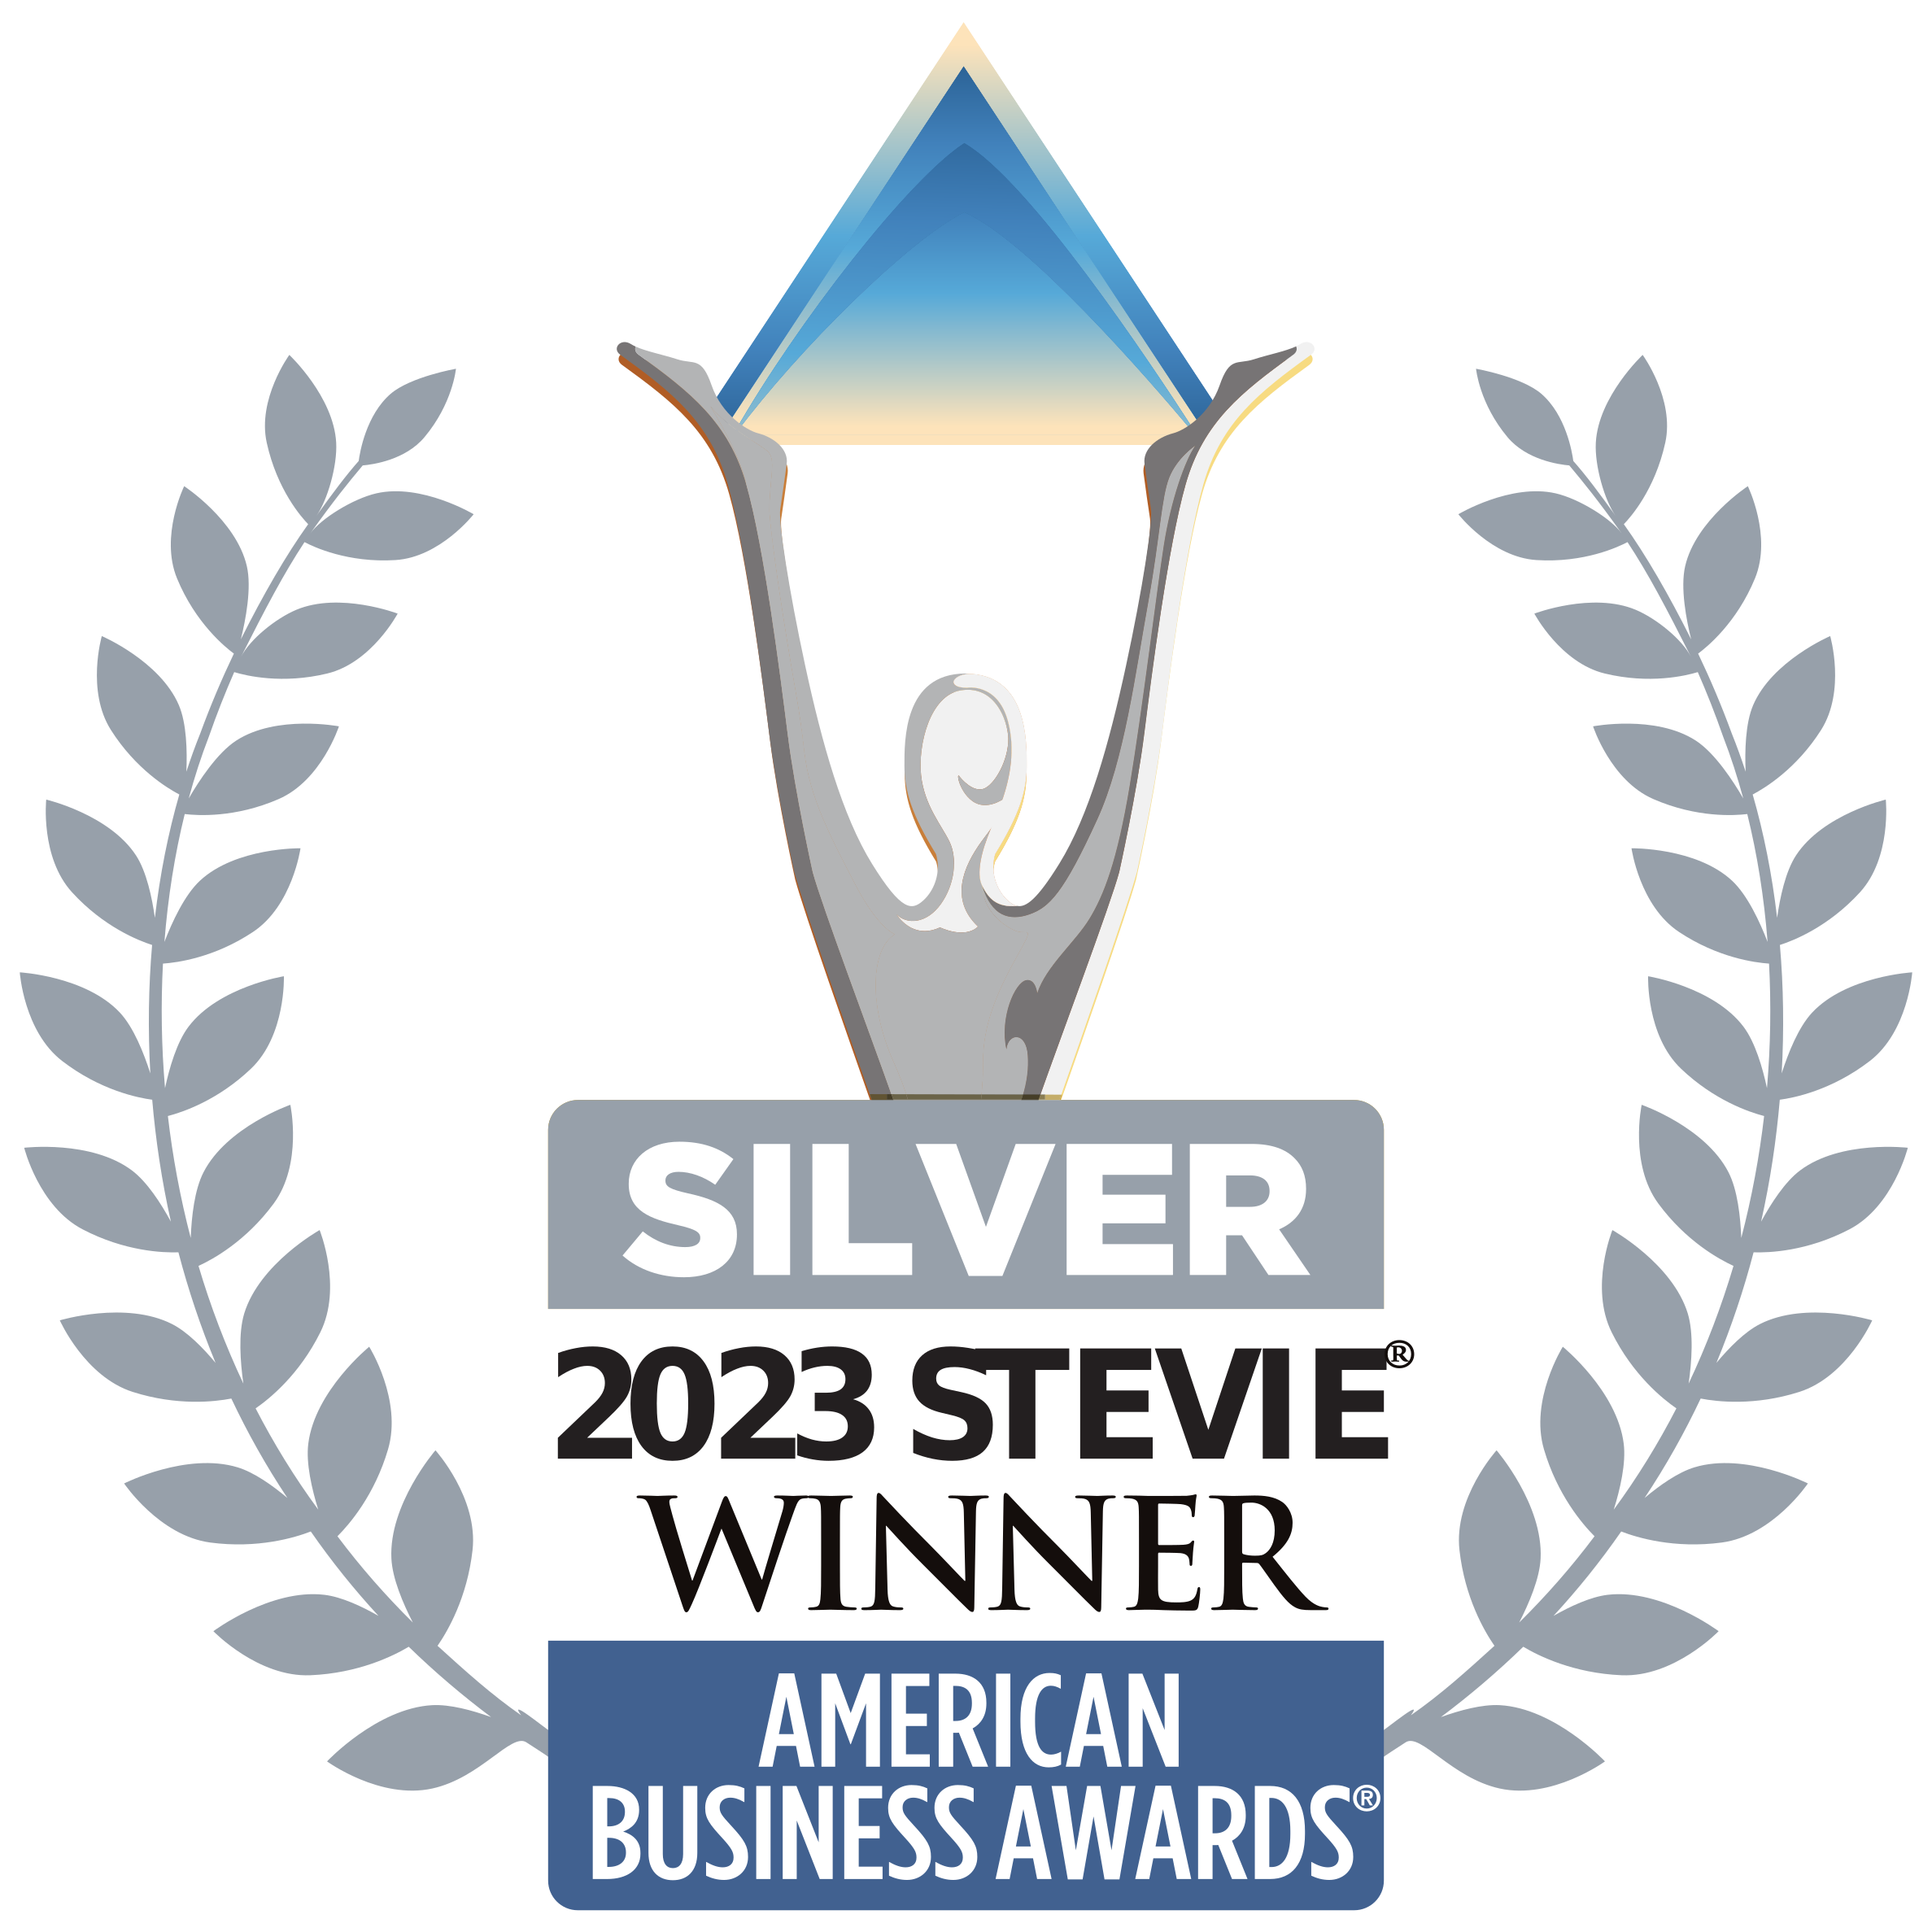 5WPR Co-CEO Matt Caiola Awarded Silver Stevie for Communications, Investor Relations, or PR Executive of the Year